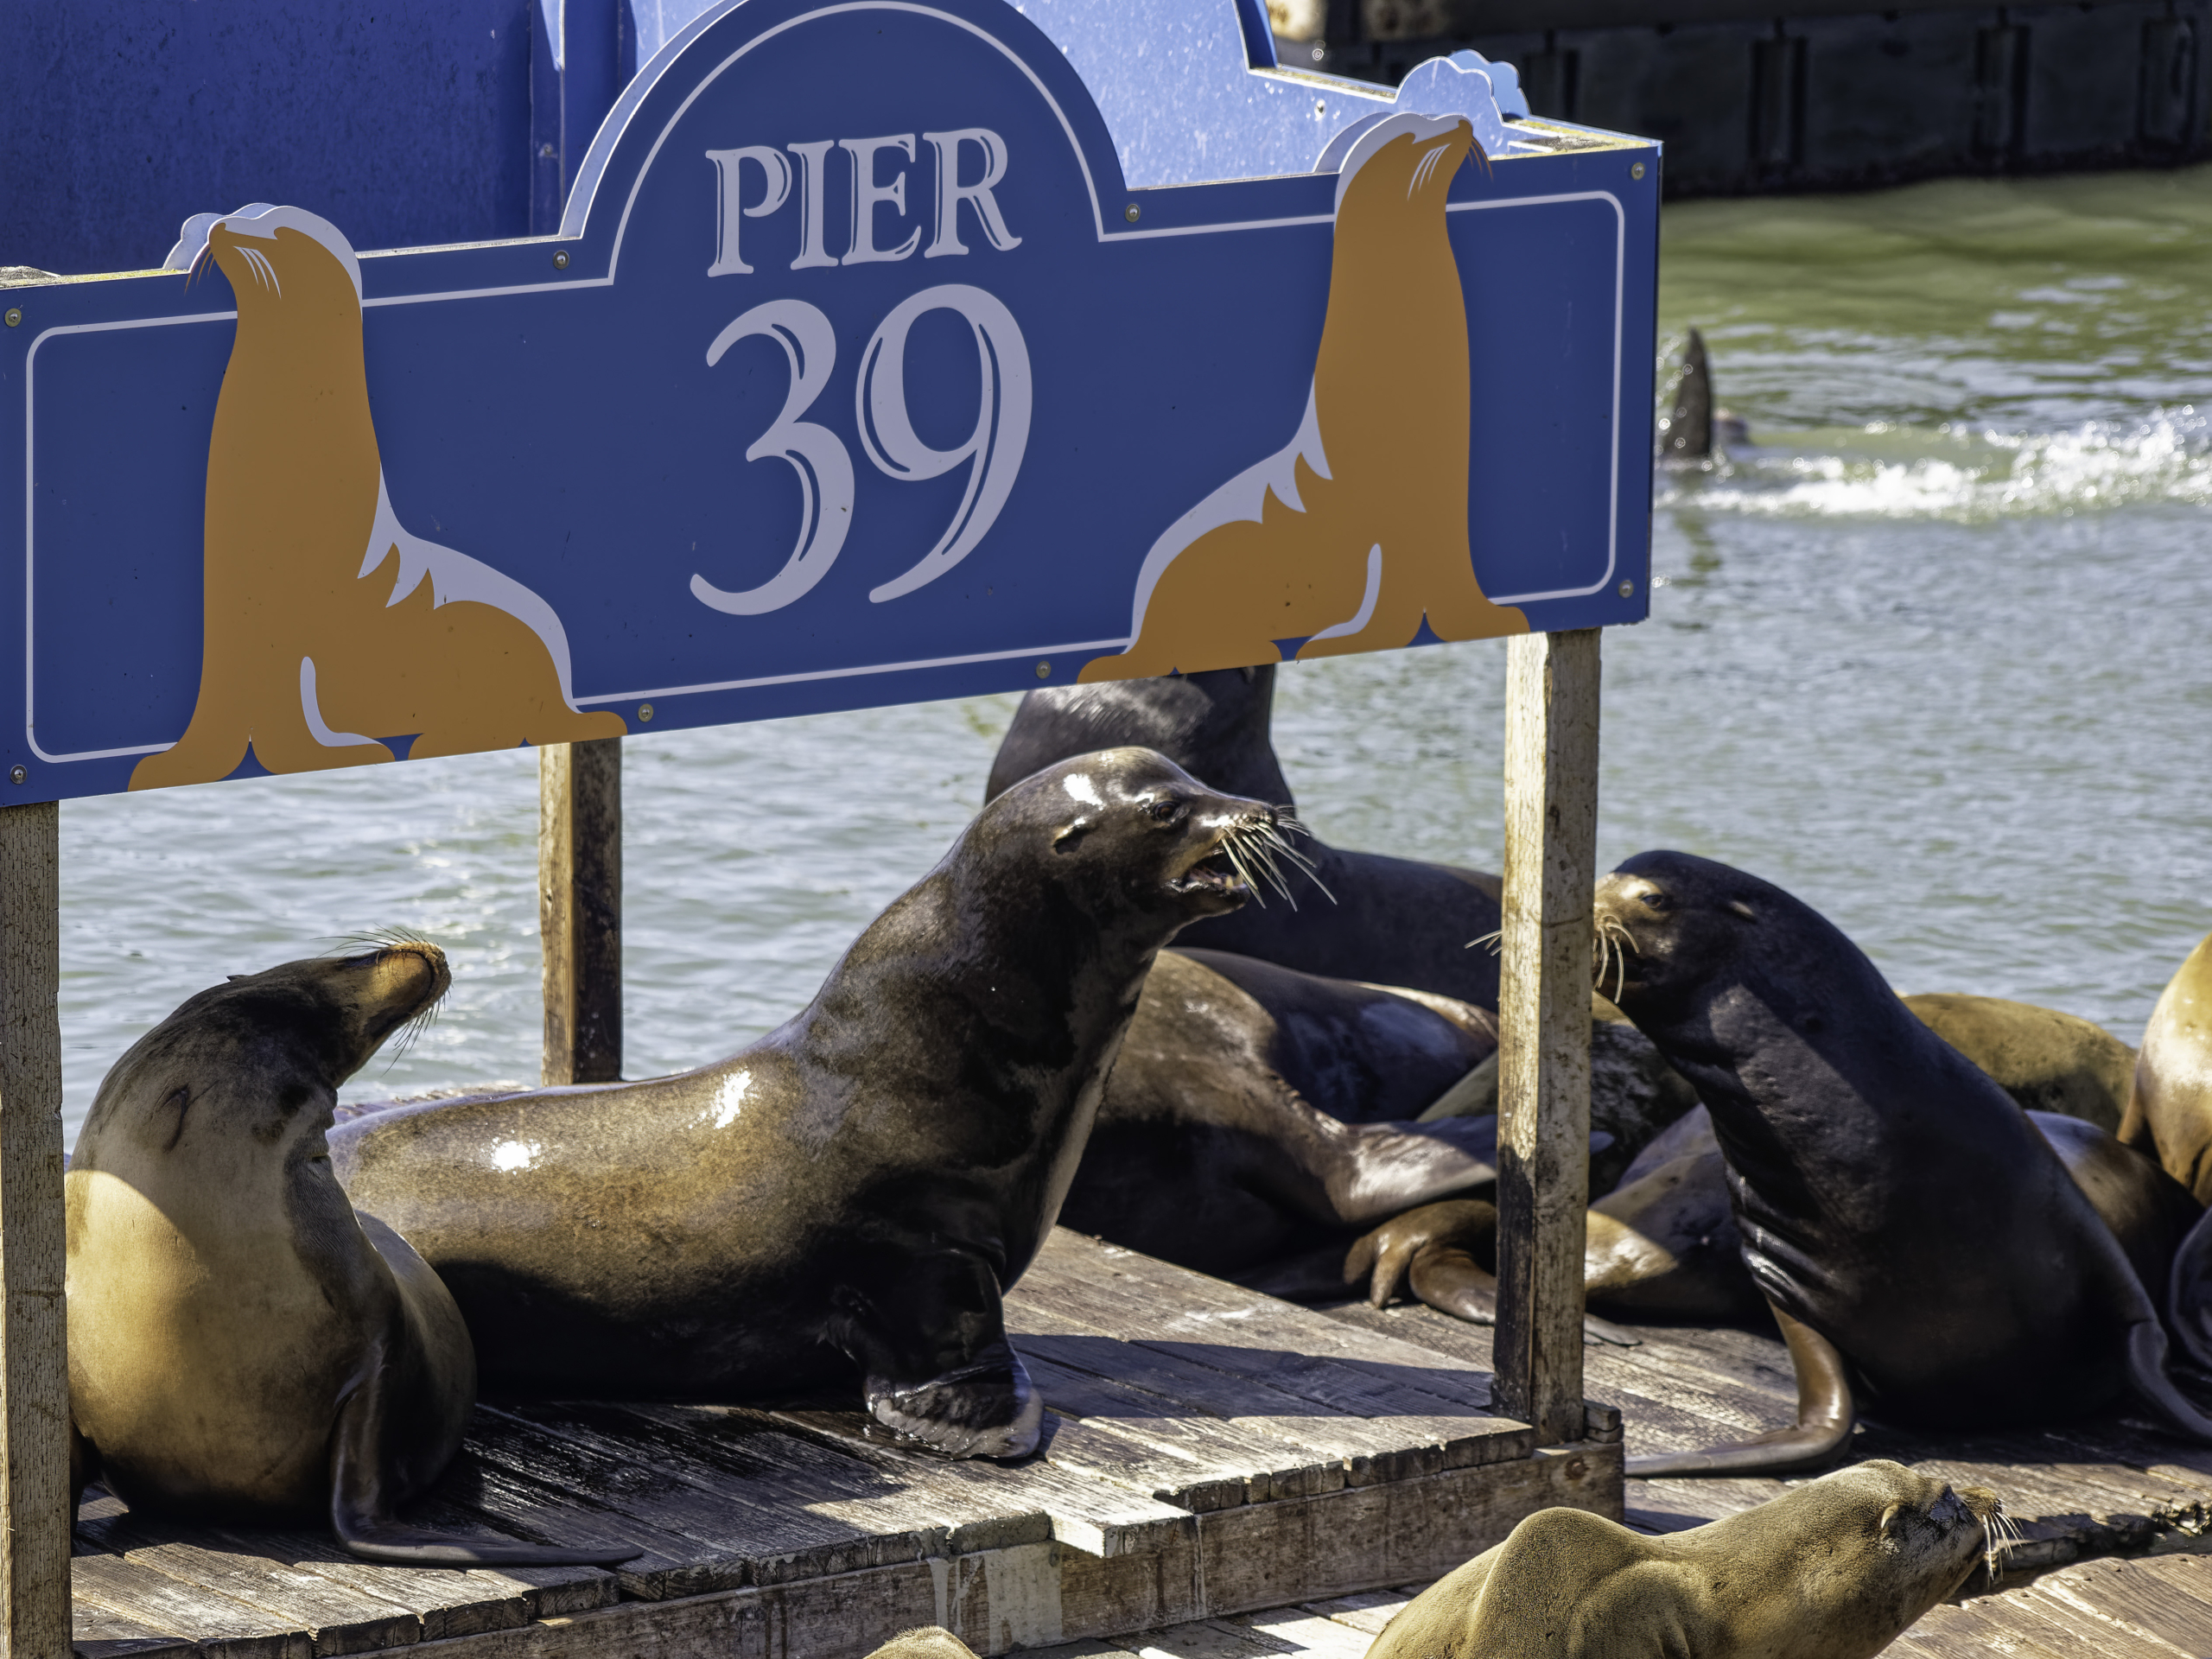 The Marine Mammal Center opens the Sea Lion Spot at Pier 39